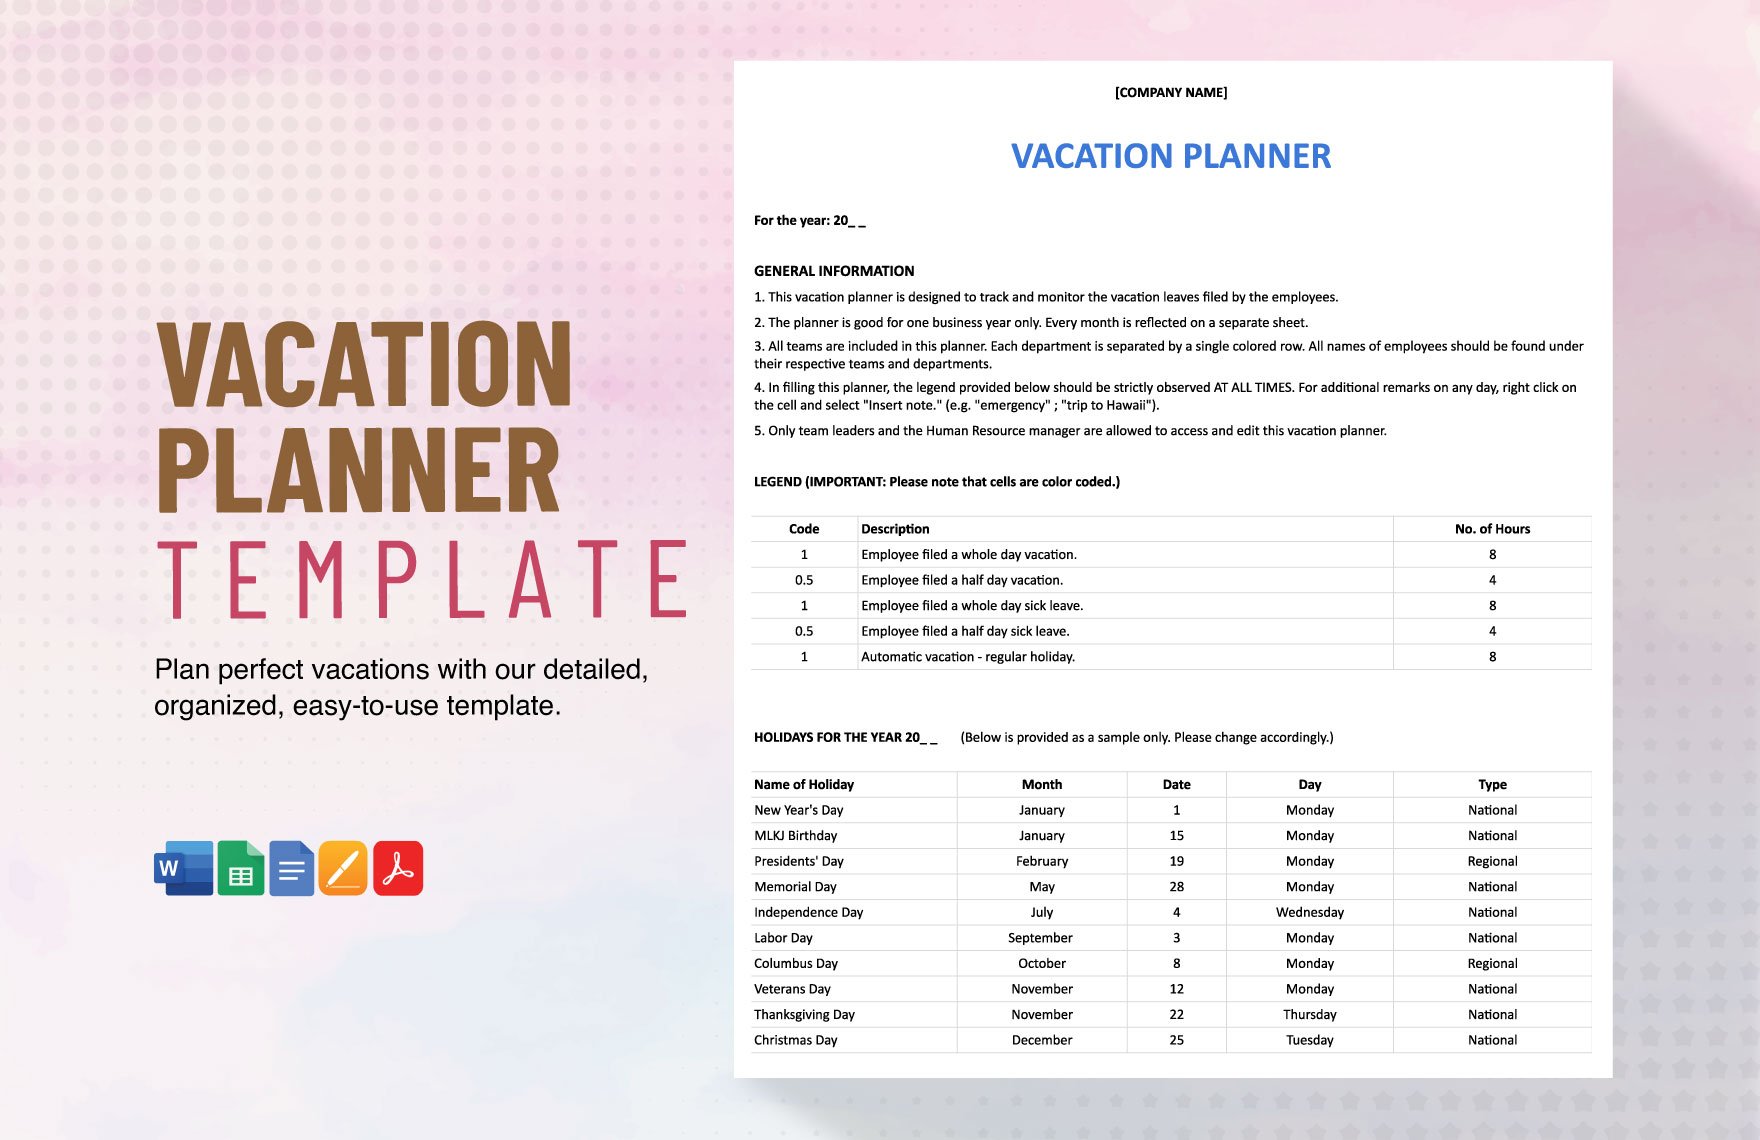 Vacation Planner Template in Word, Google Docs, PDF, Google Sheets, Apple Pages